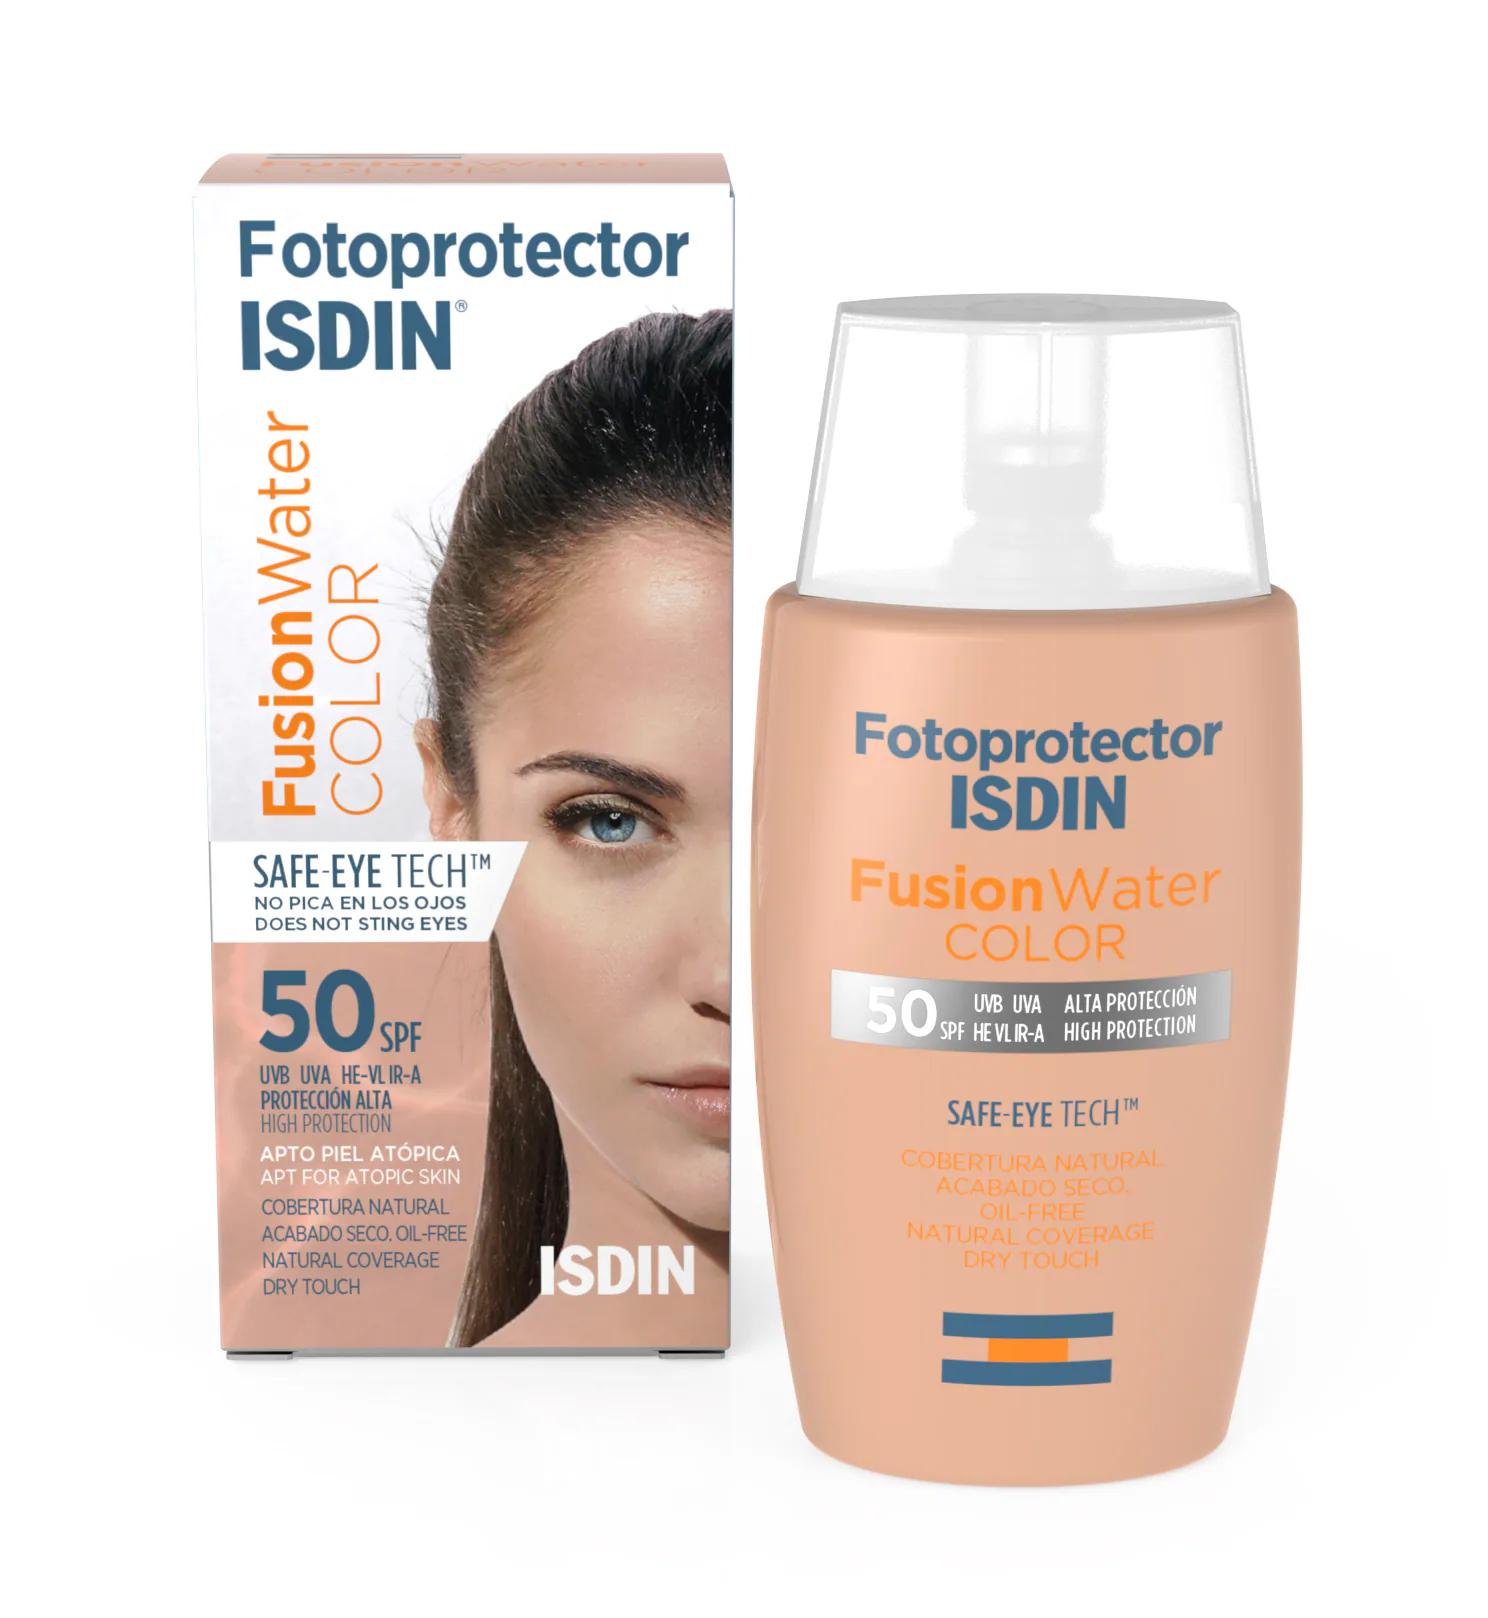 Fotoprotector Isdin Fusion Water Color